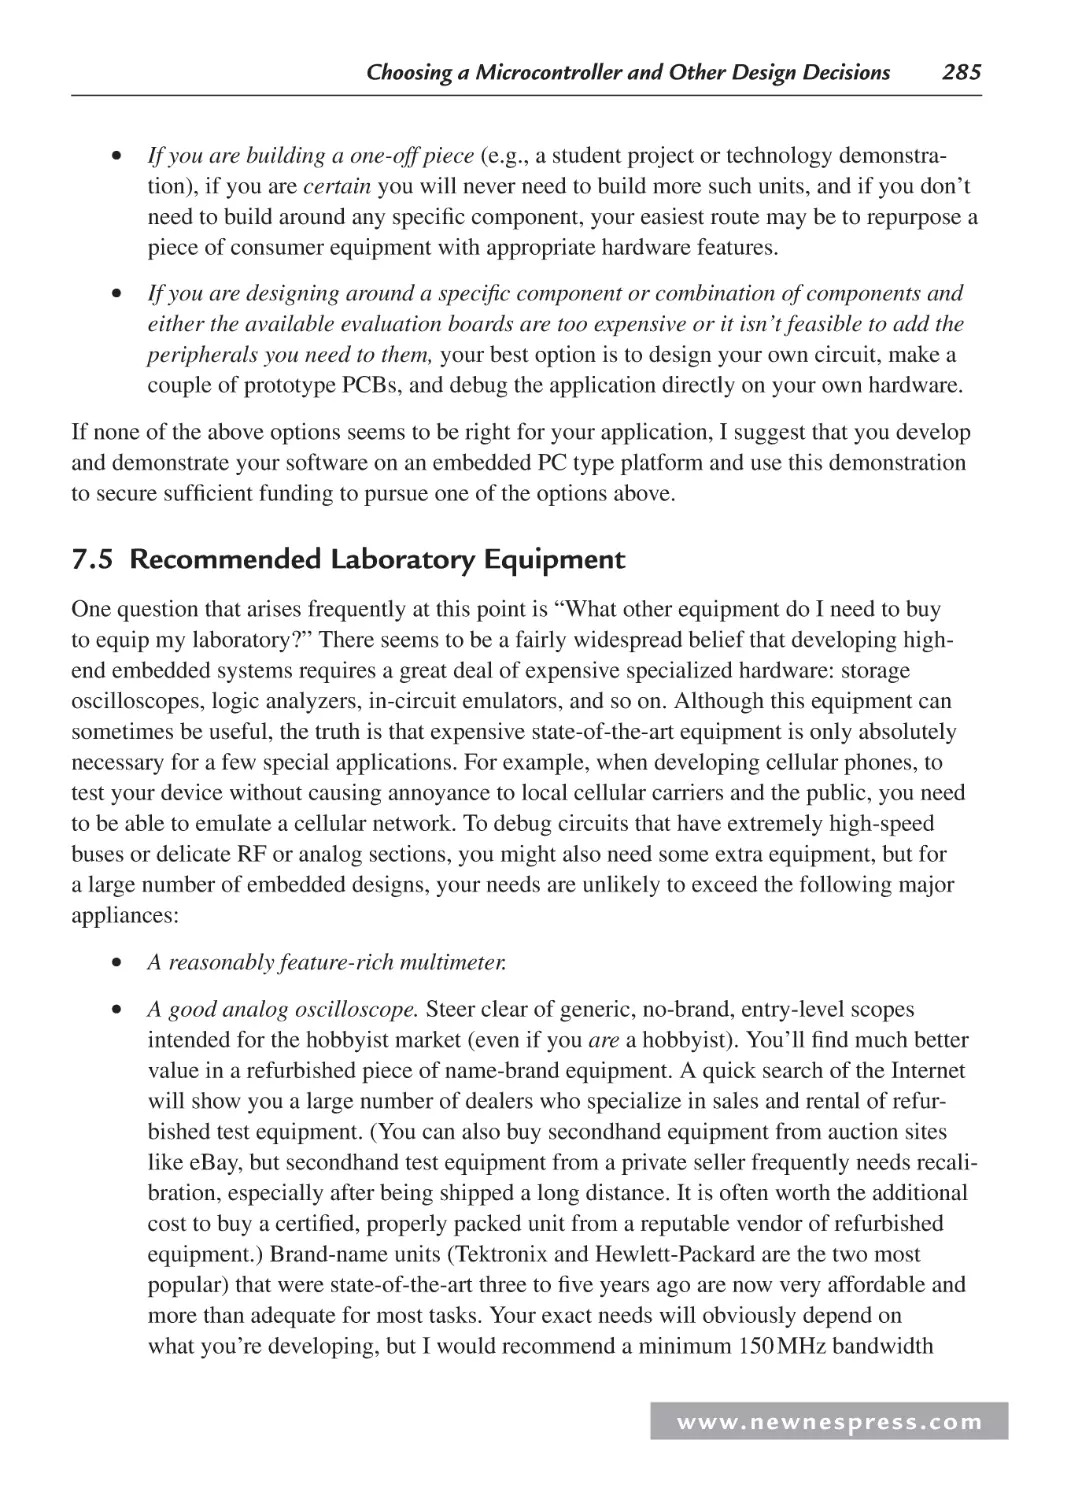 7.5 Recommended Laboratory Equipment